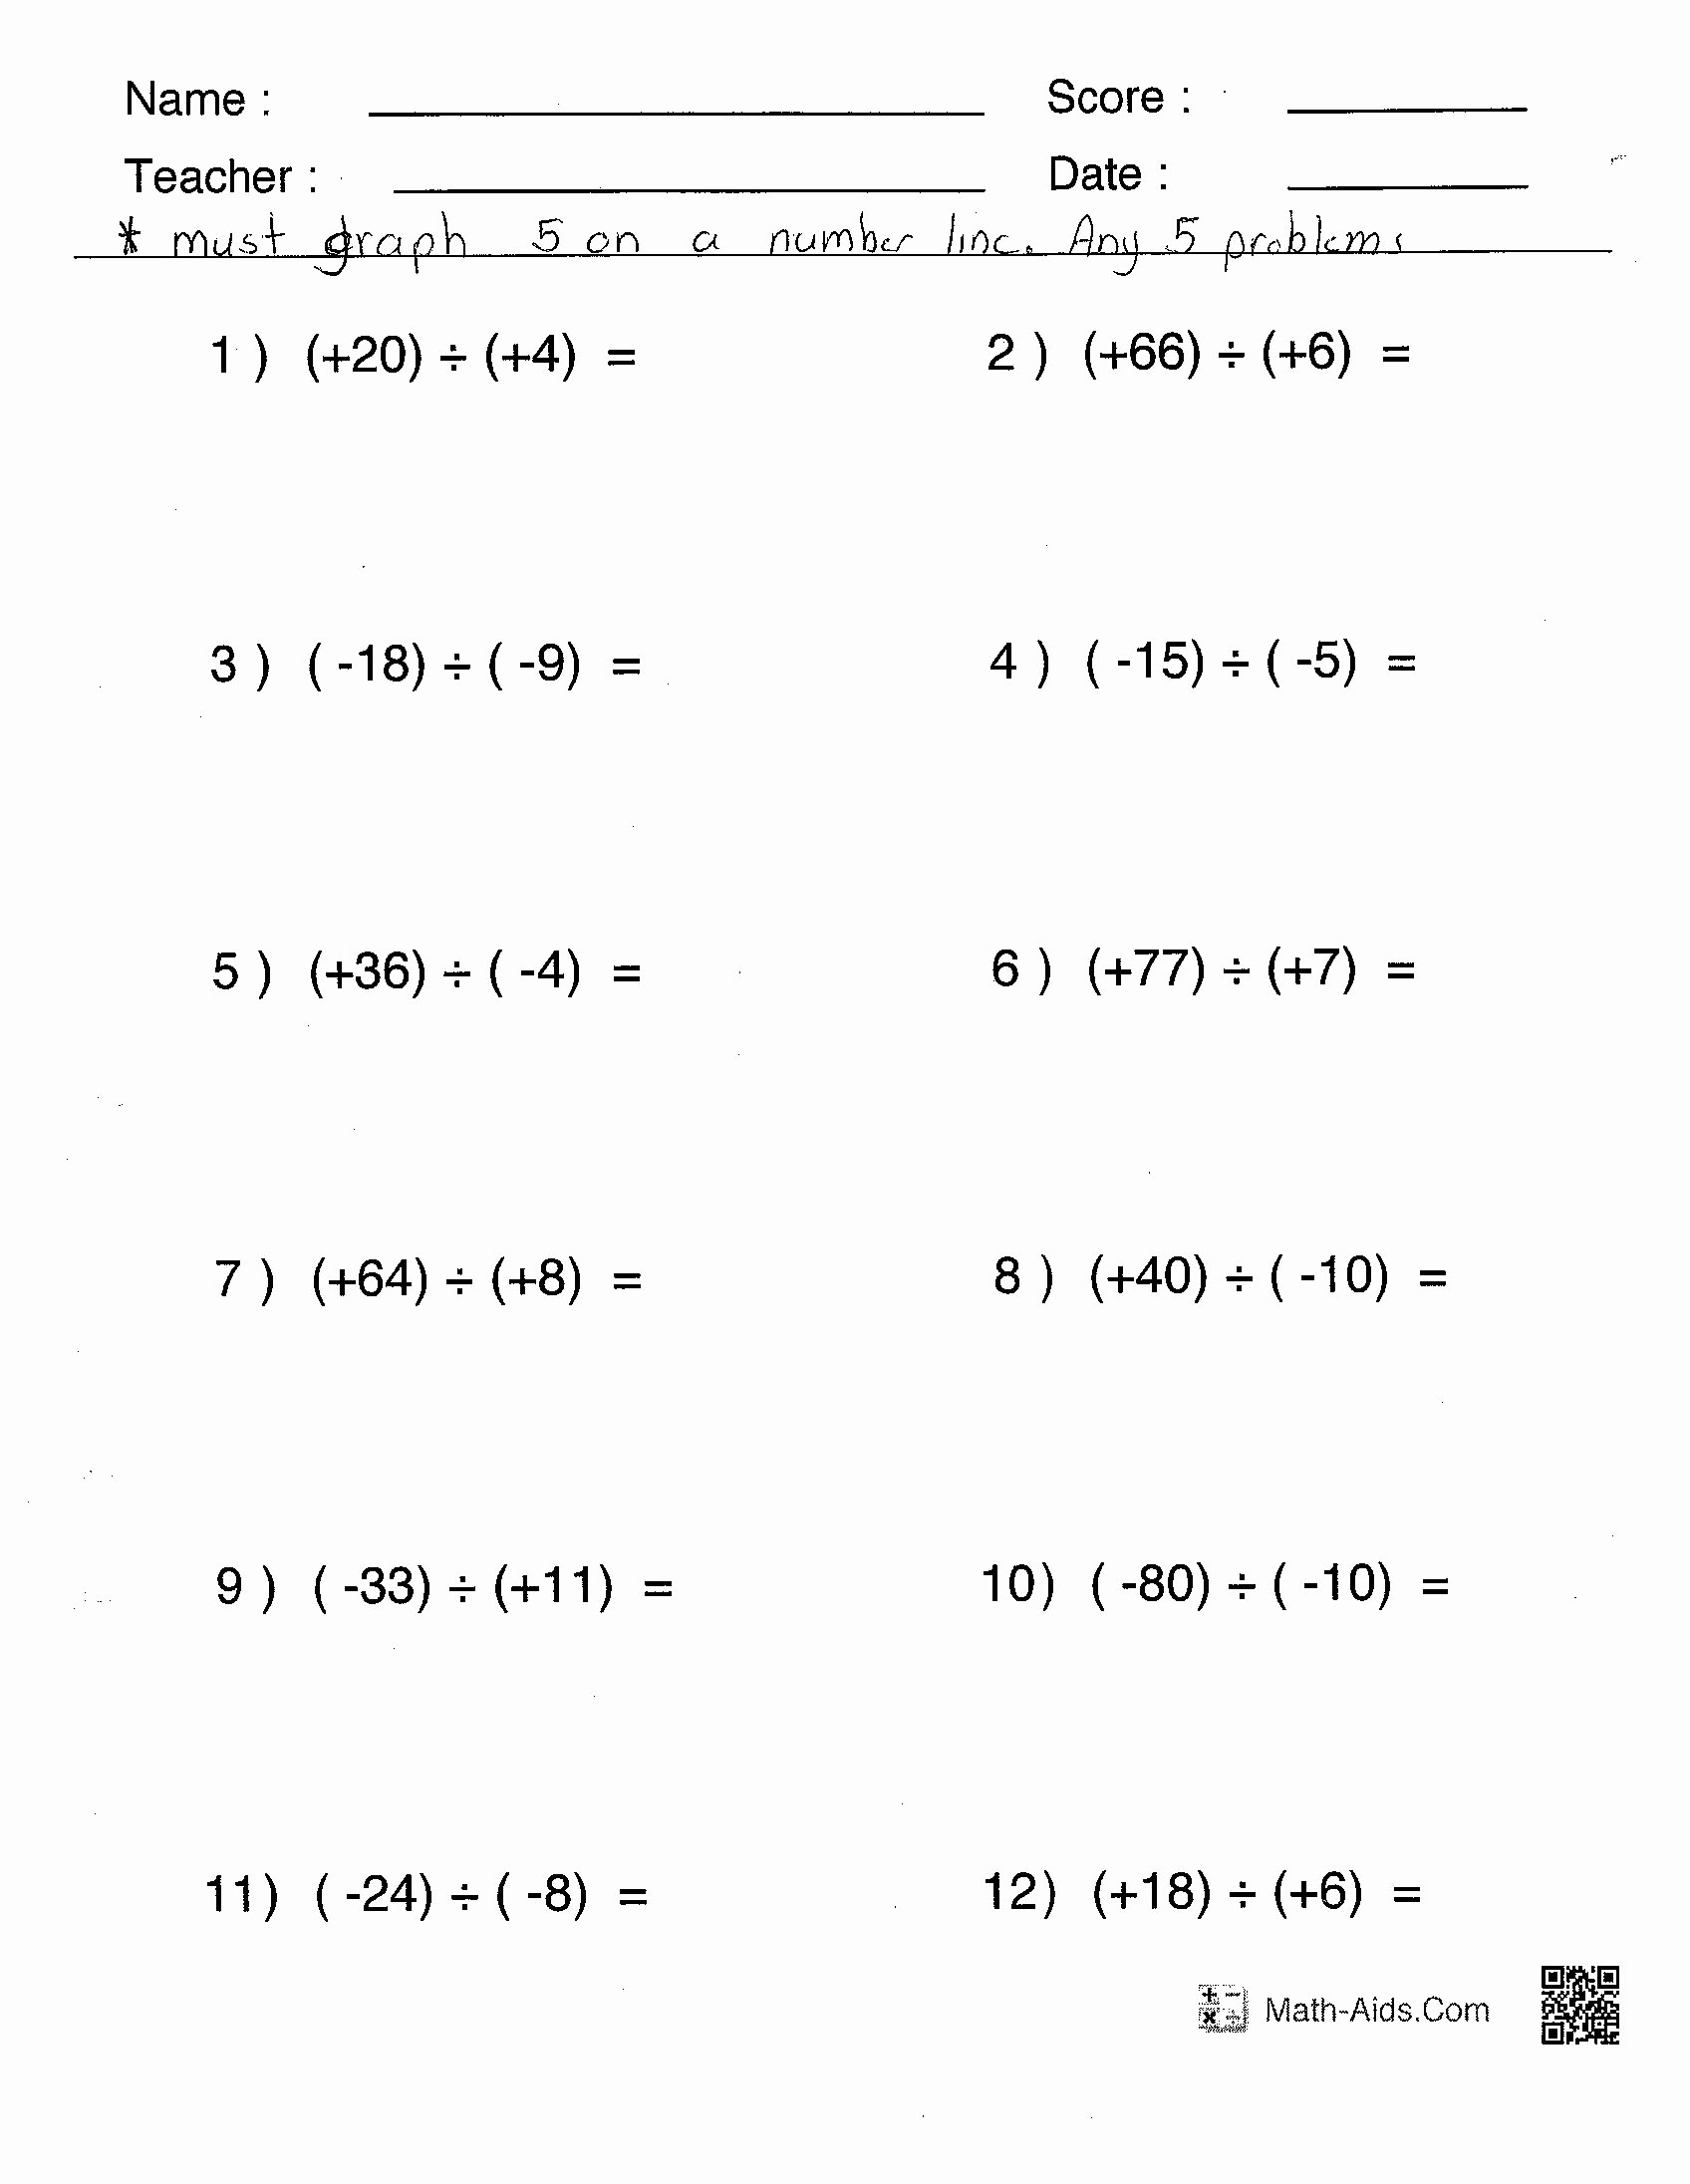 Operations with Integers Worksheet Pdf Lovely Operations with Integers Worksheet Pdf the Best Worksheets